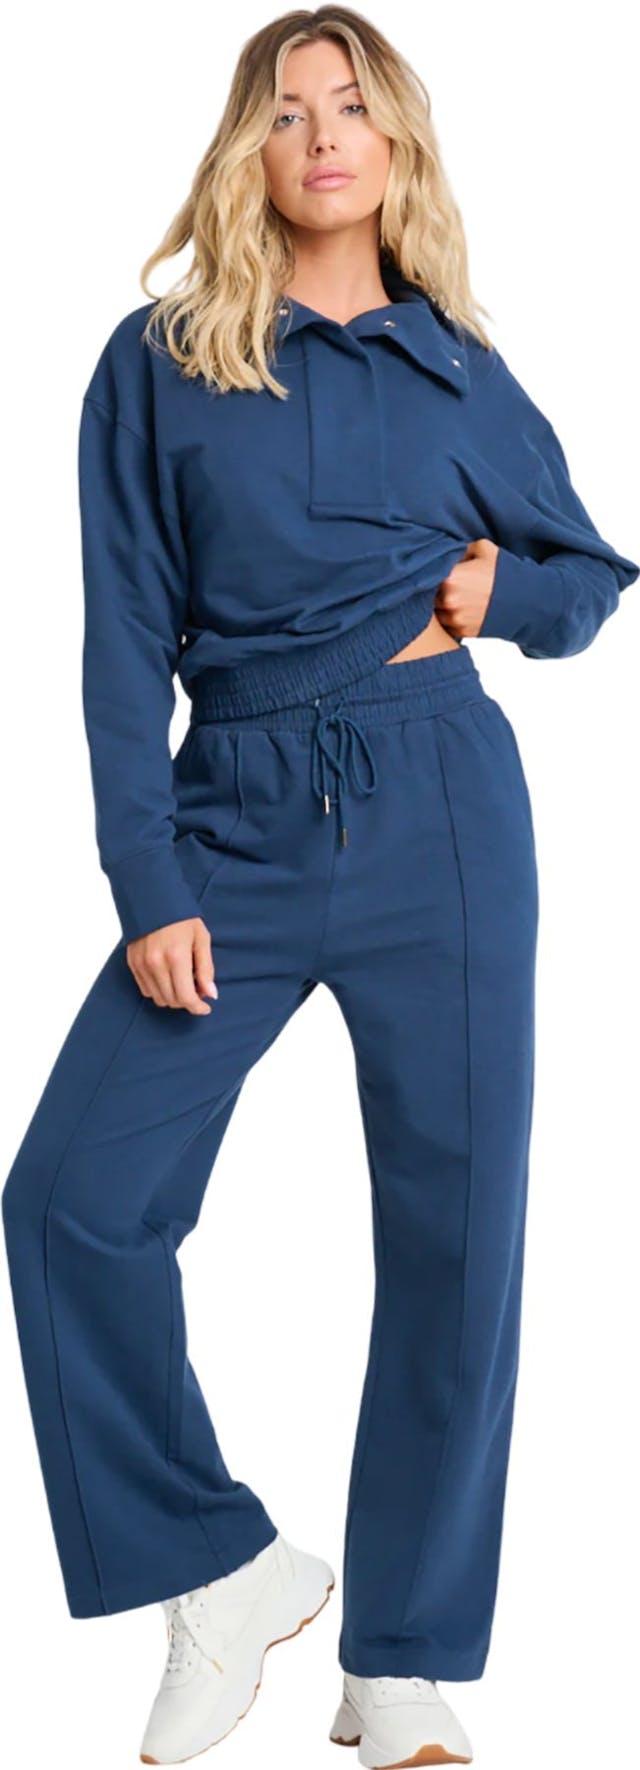 Product image for Organic Comfort Loose Pants - Women's